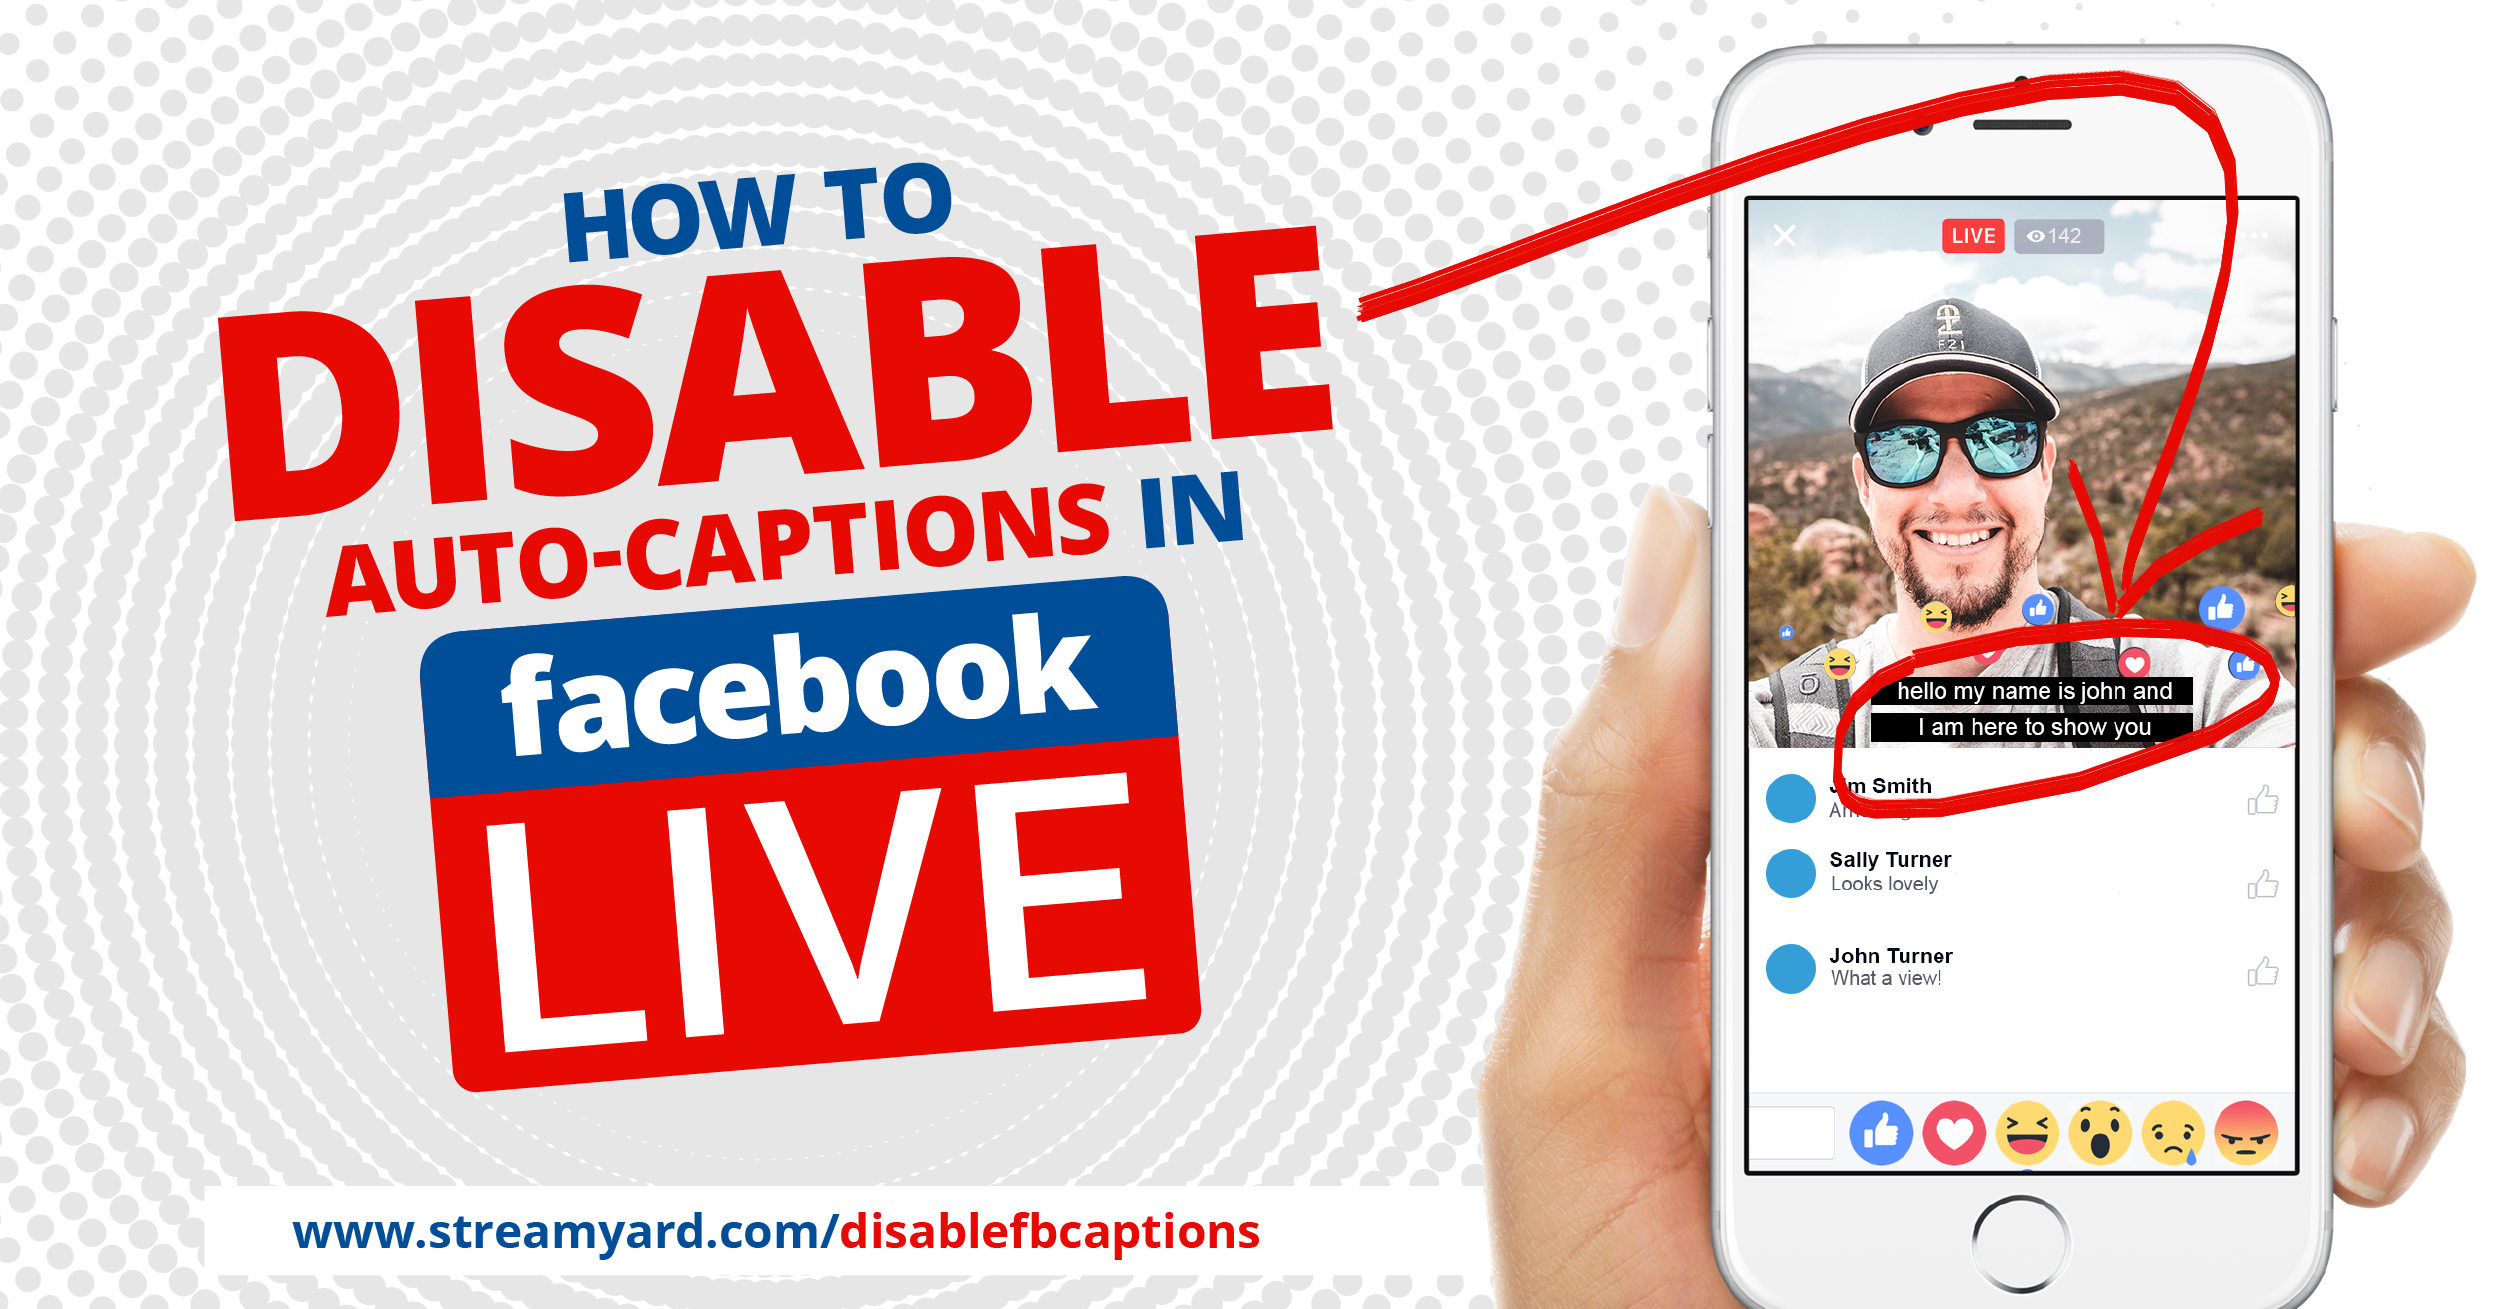 How to Turn Off Auto Captions on Facebook App Android